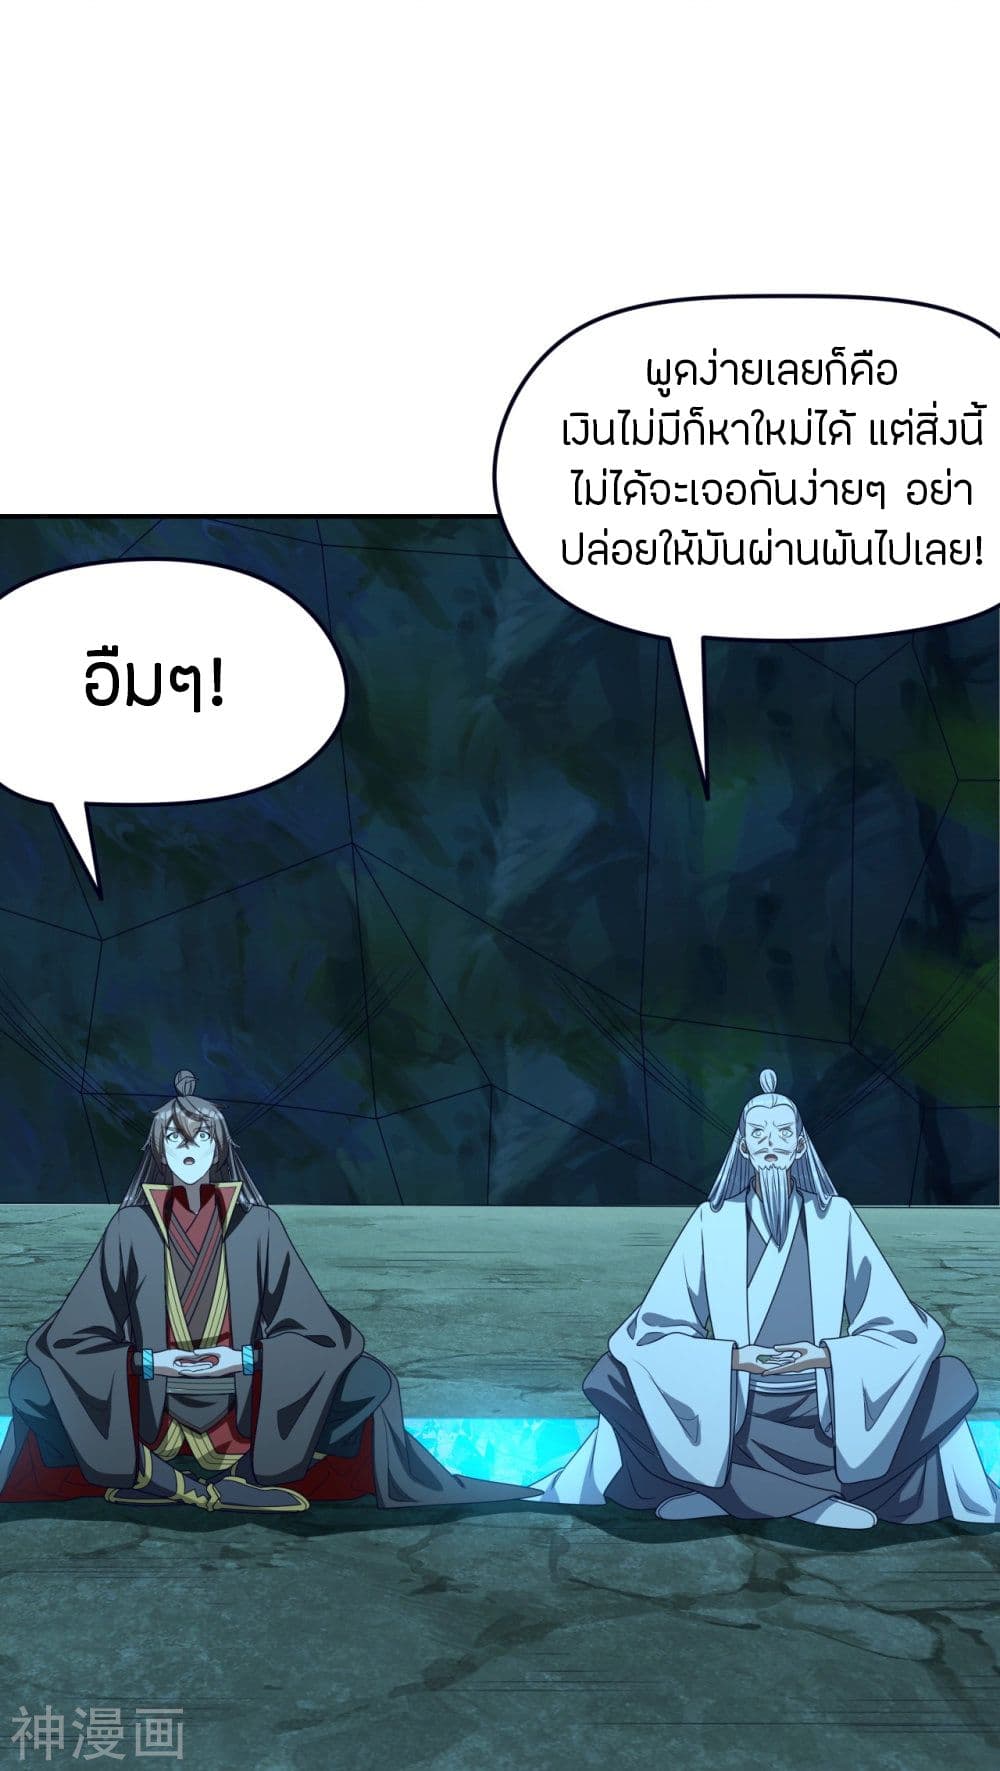 Banished Disciple's Counterattack เธเธฑเธเธฃเธเธฃเธฃเธ”เธดเน€เธเธตเธขเธเธขเธธเธ—เธ 239 (64)